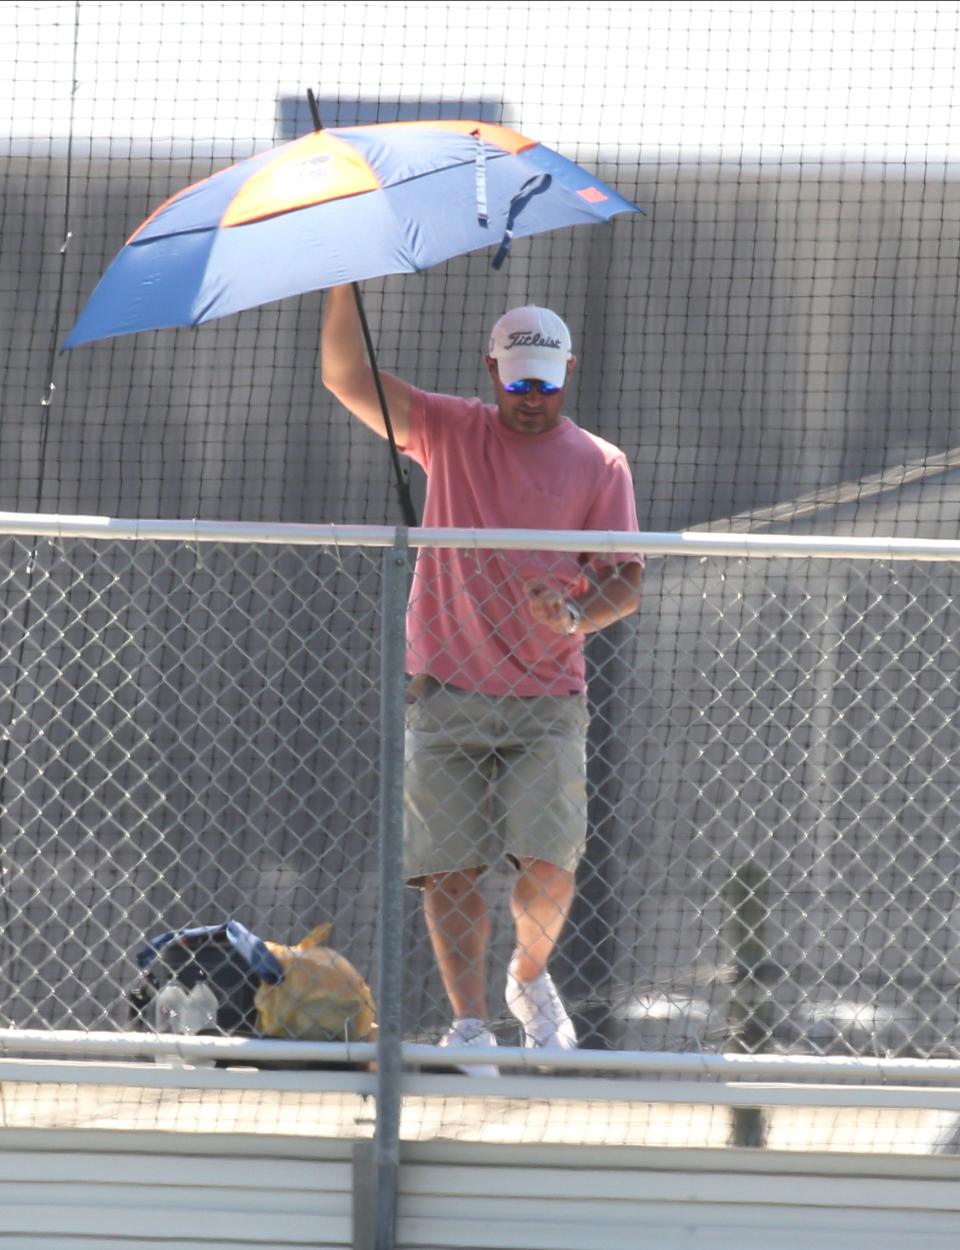 Robert Alfano of Demarest tries to use his Syracuse University umbrella to cool off while watching a baseball game in Wood-Ridge, NJ on May 21, 2022.